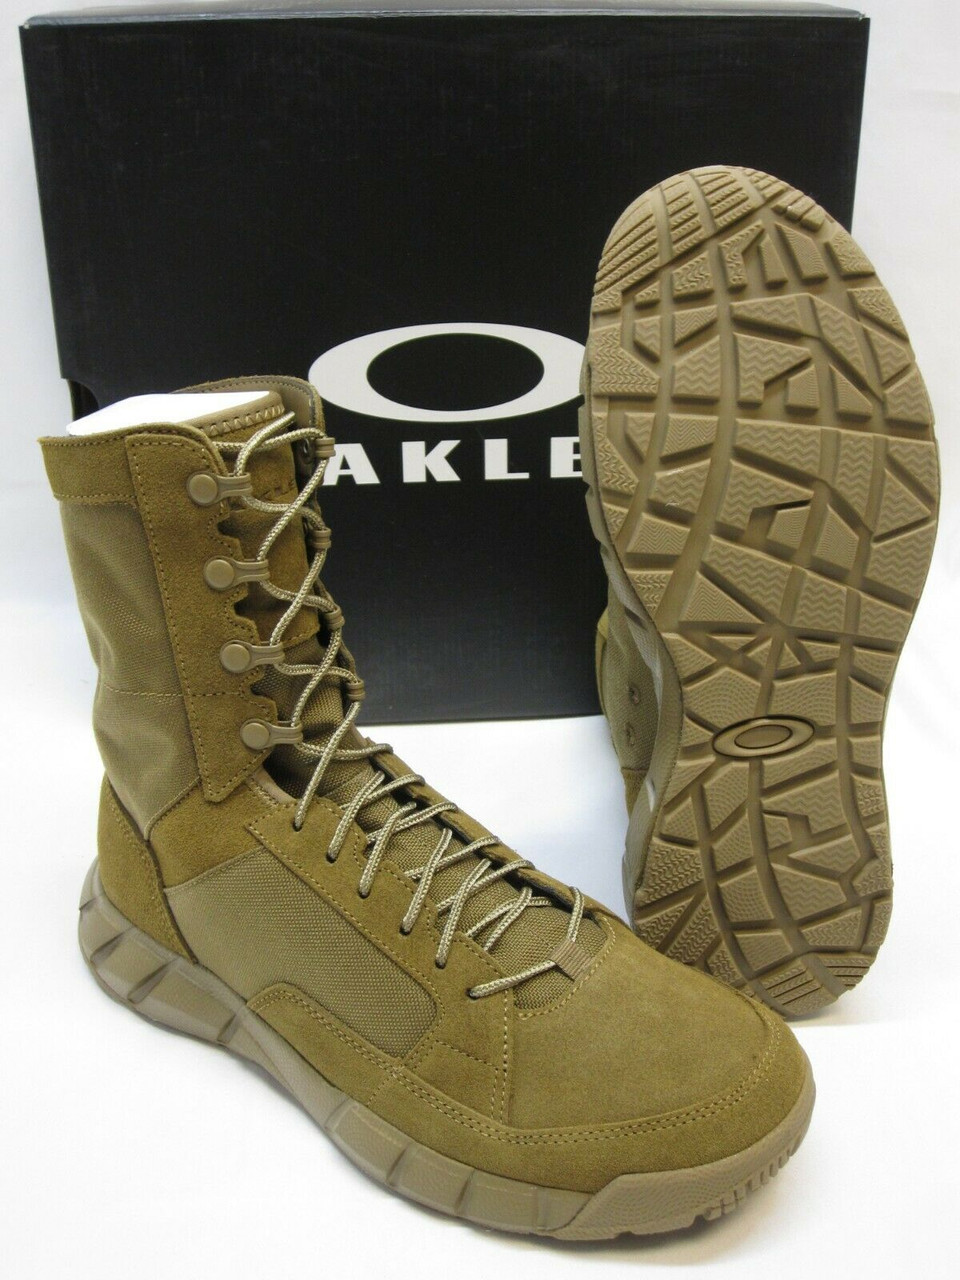 OAKLEY LT ASSAULT 2 ARMY OCP MILITARY COMBAT BOOTS COYOTE BROWN ...